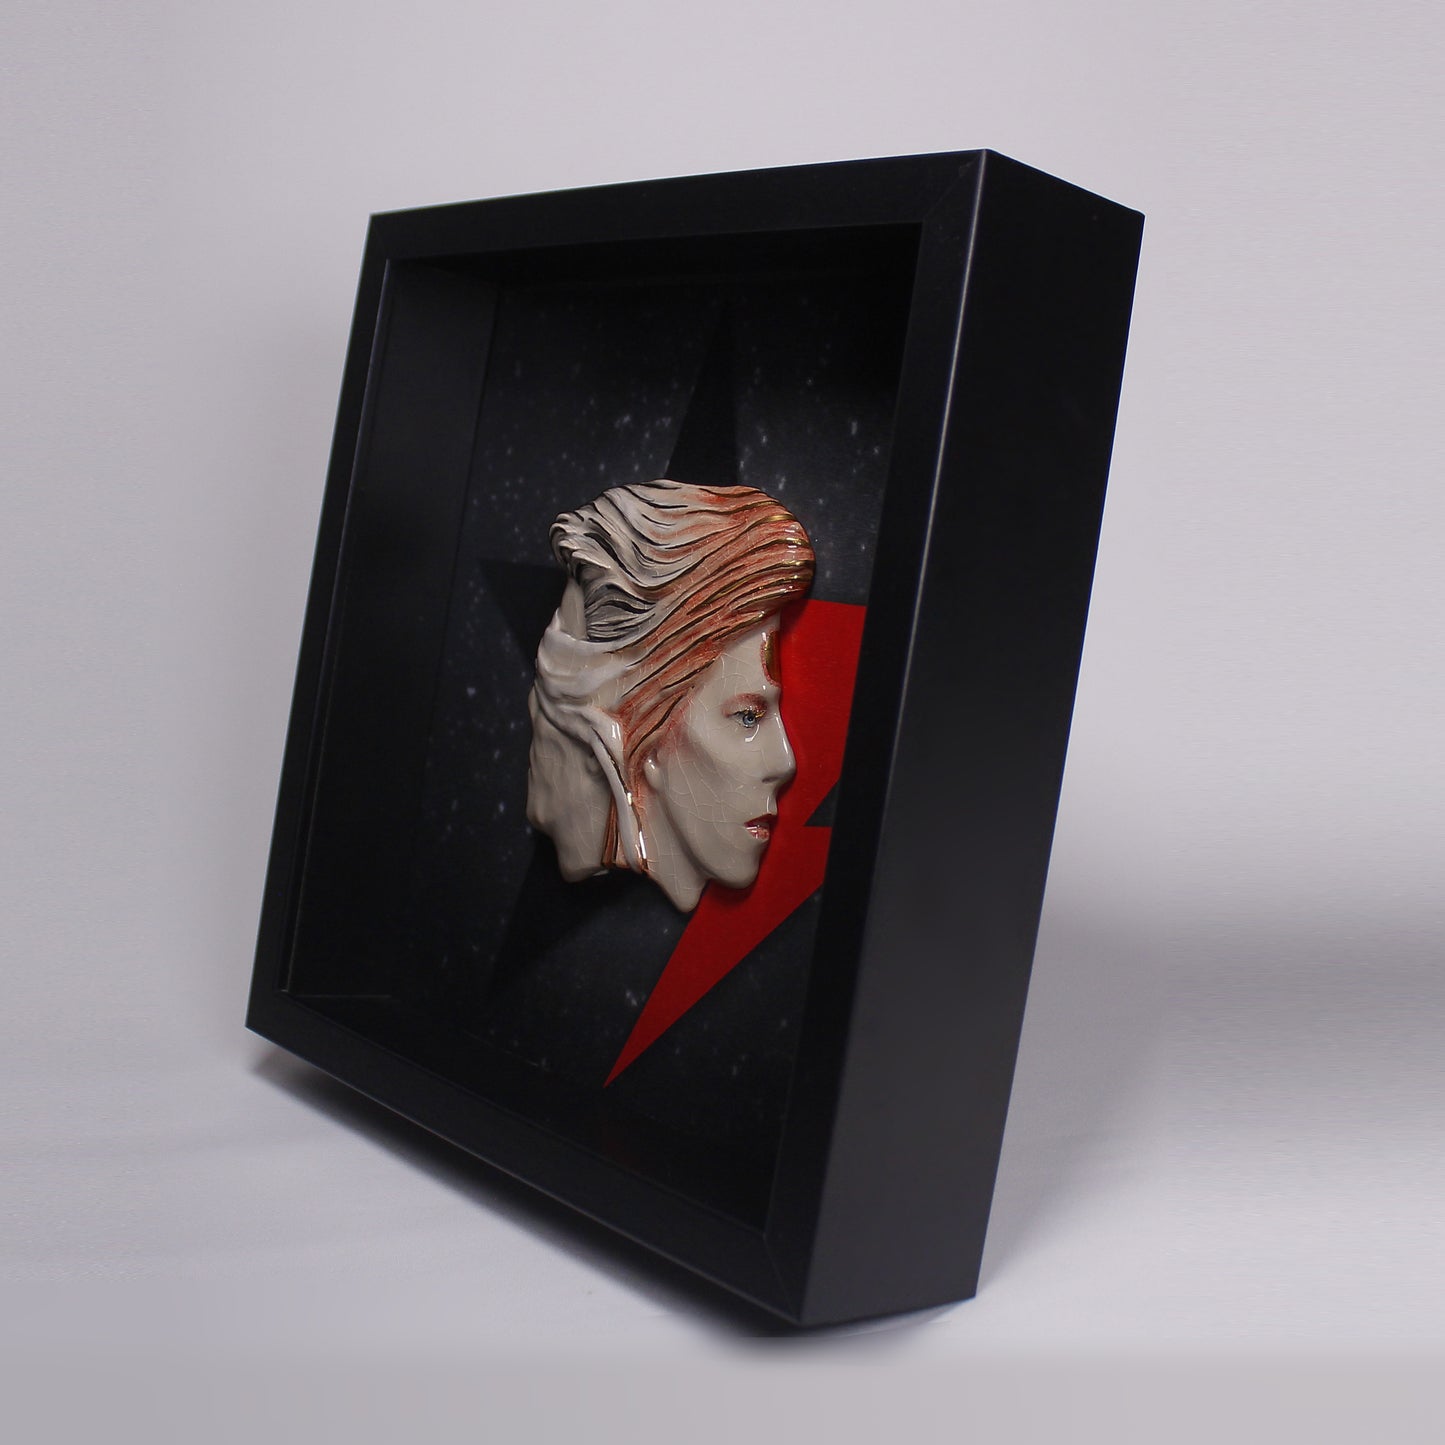 David Bowie 'Ziggy Stardust and The Blind Prophet' Double Head Framed Ceramic Sculpture